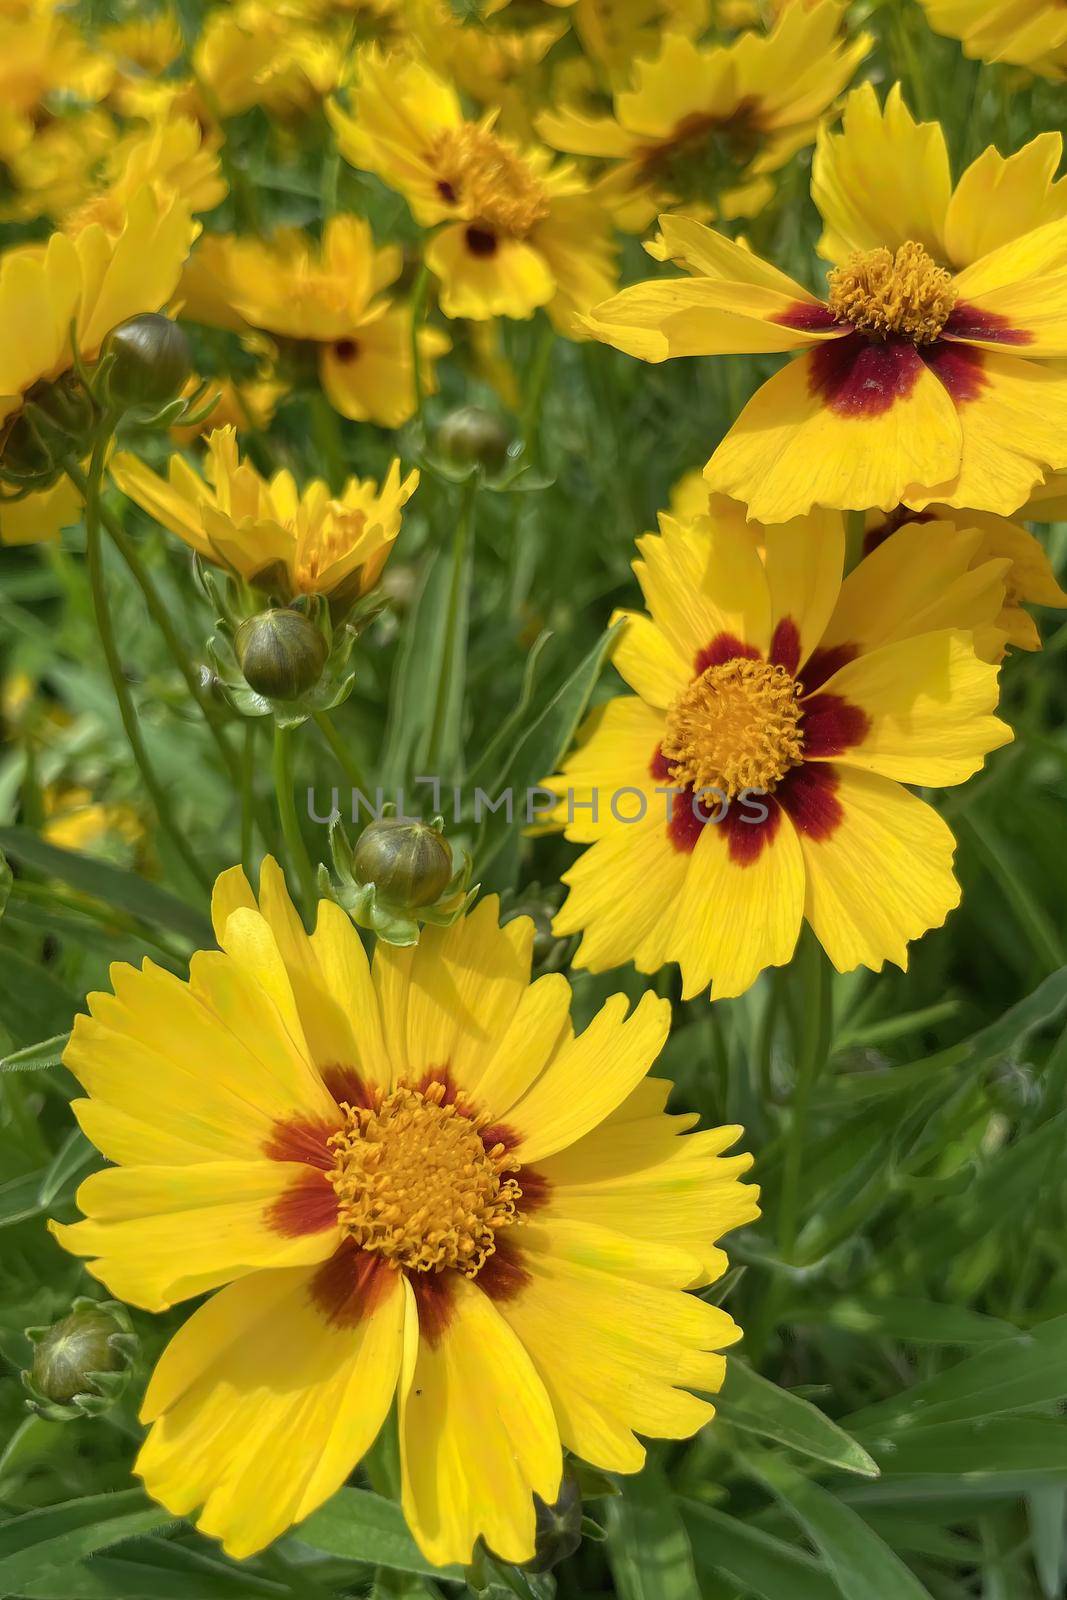 Gaillardia, common name blanket flower is a genus of flowering plants in the family Asteraceae, native to North and South America.